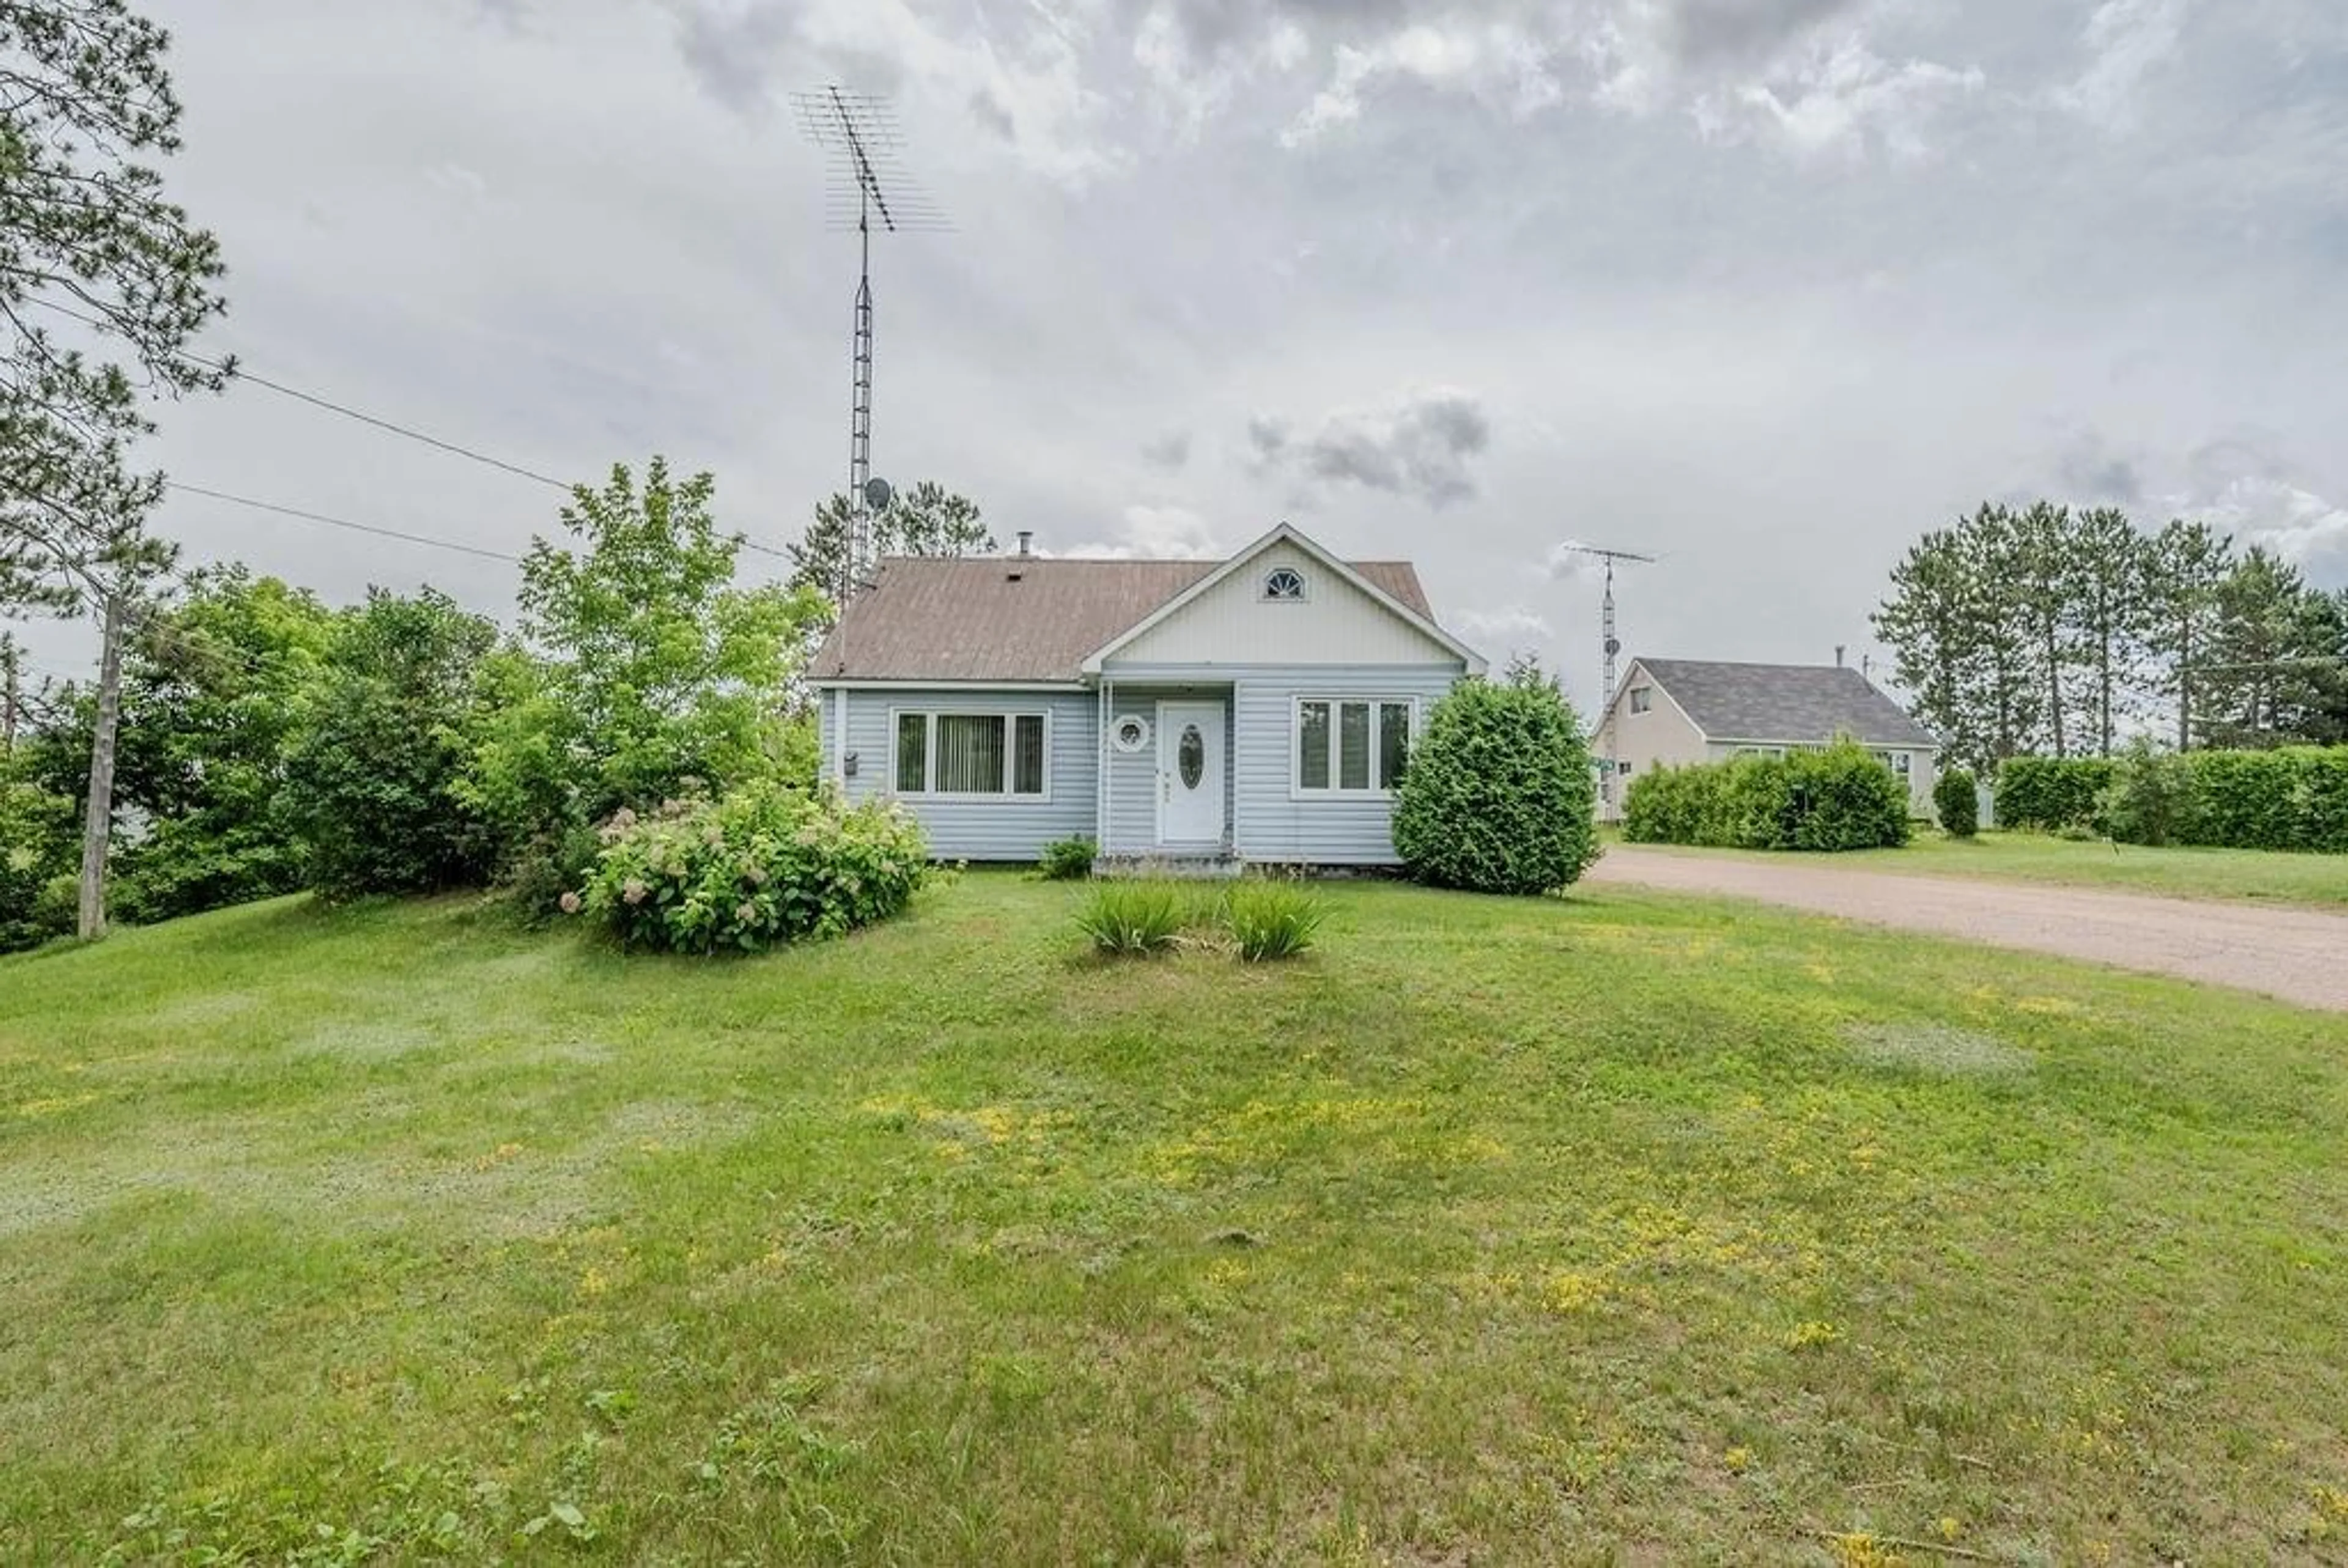 Cottage for 19319A 60 Hwy, Barry's Bay Ontario K0J 1B0